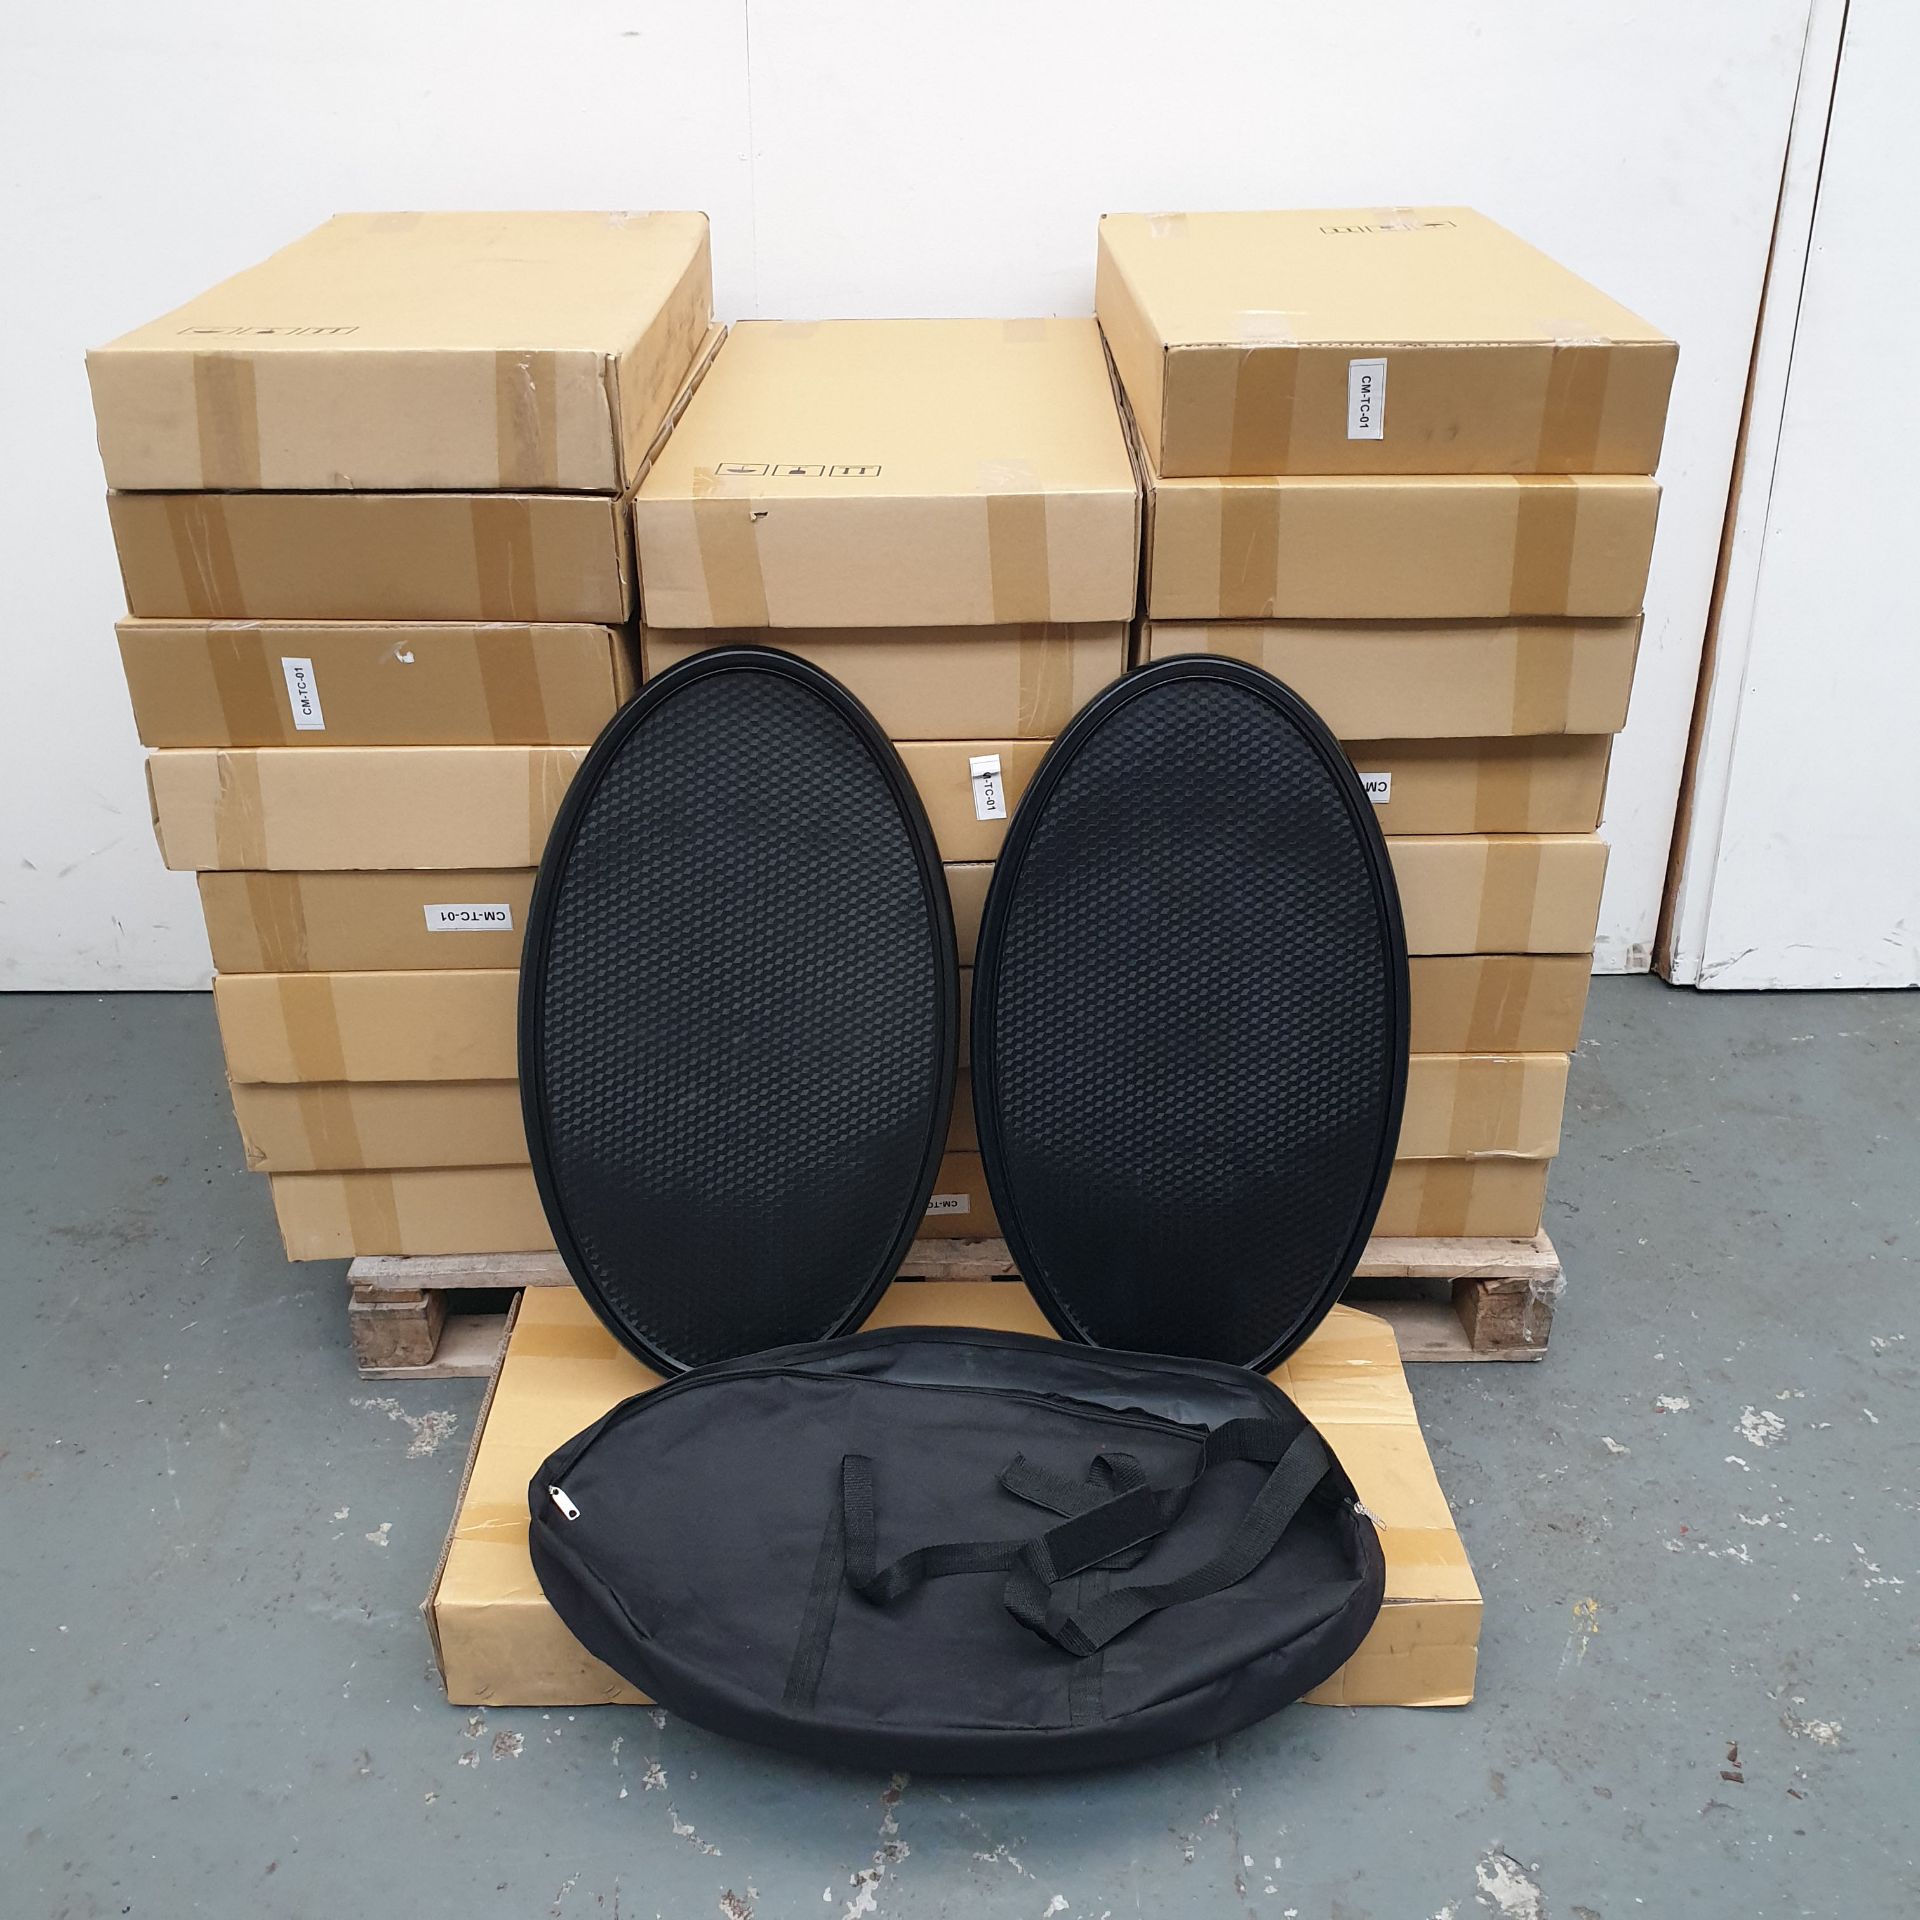 24 pairs of Lid and Base parts for Oval Display Signs. Part Number: CM-TC-01. With Carry Bags.